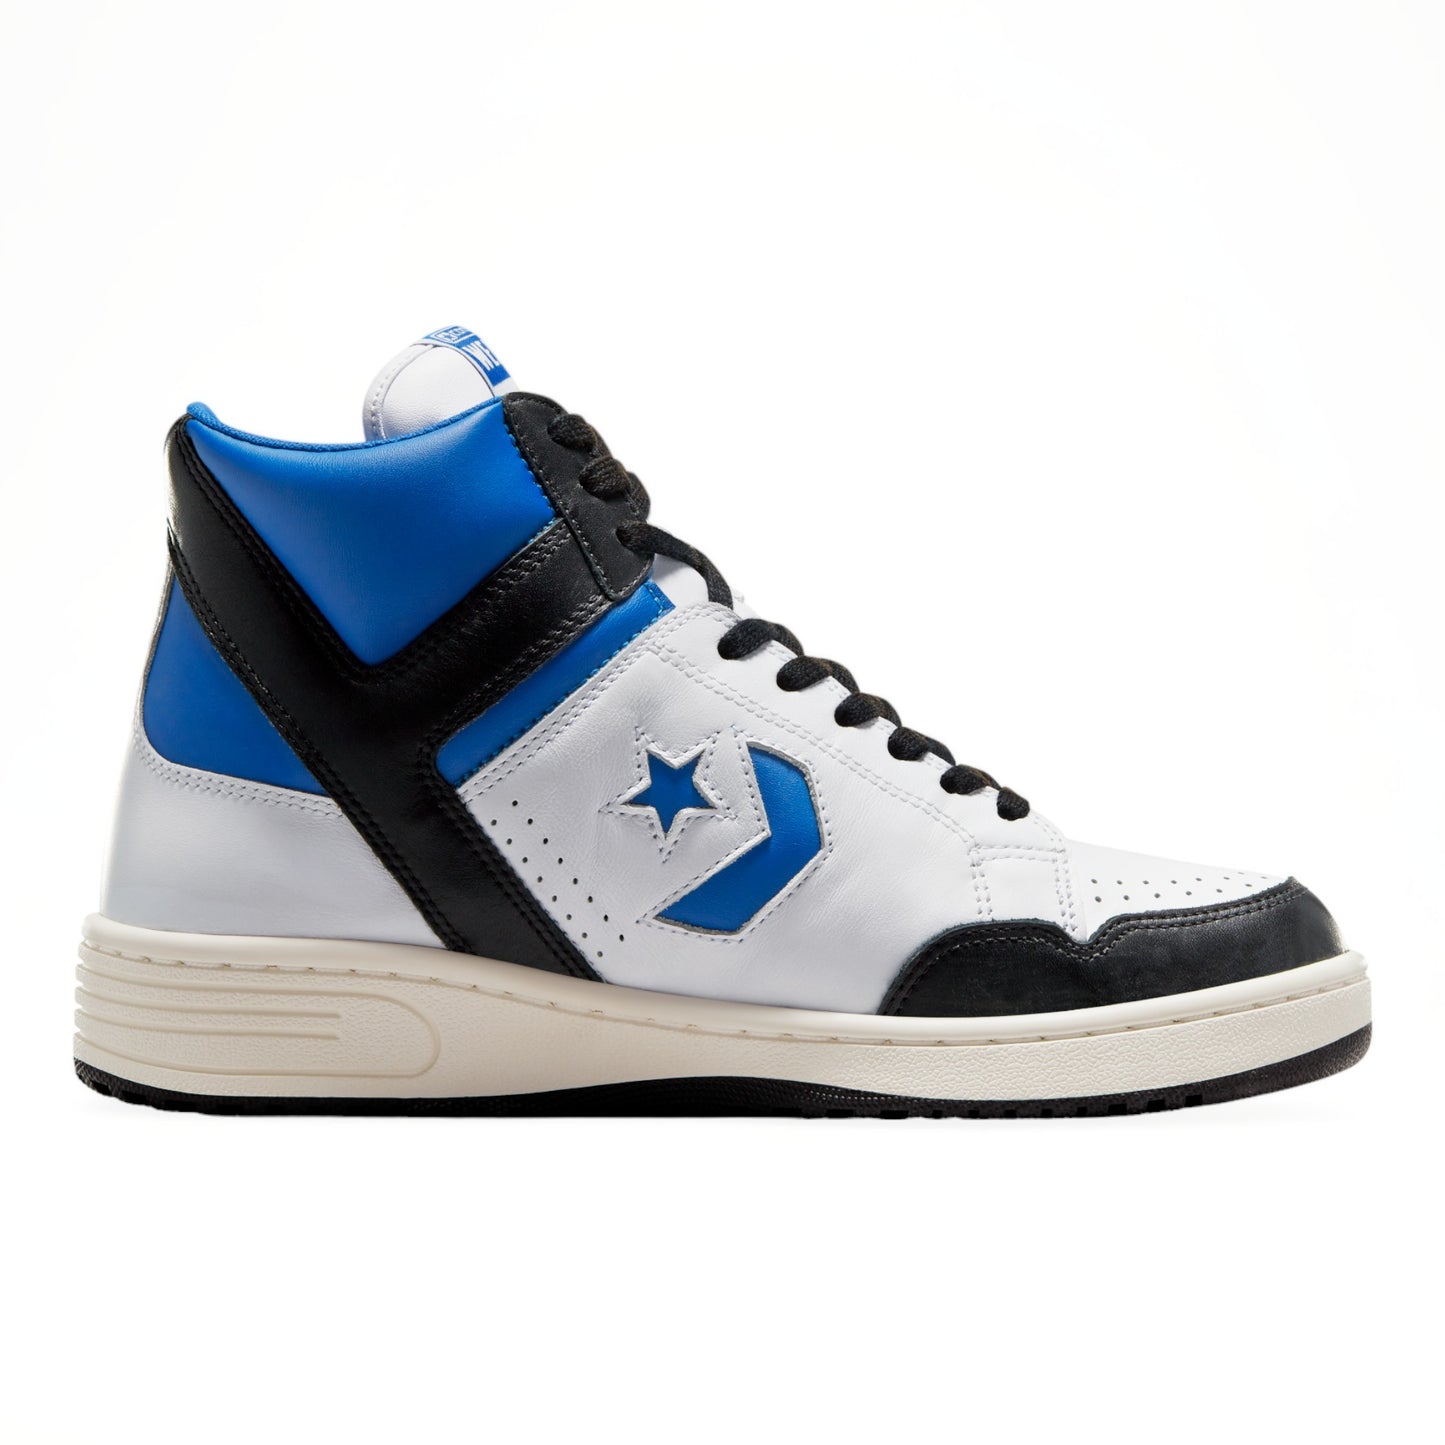 CONVERSE X FRAGMENT WEAPON MID